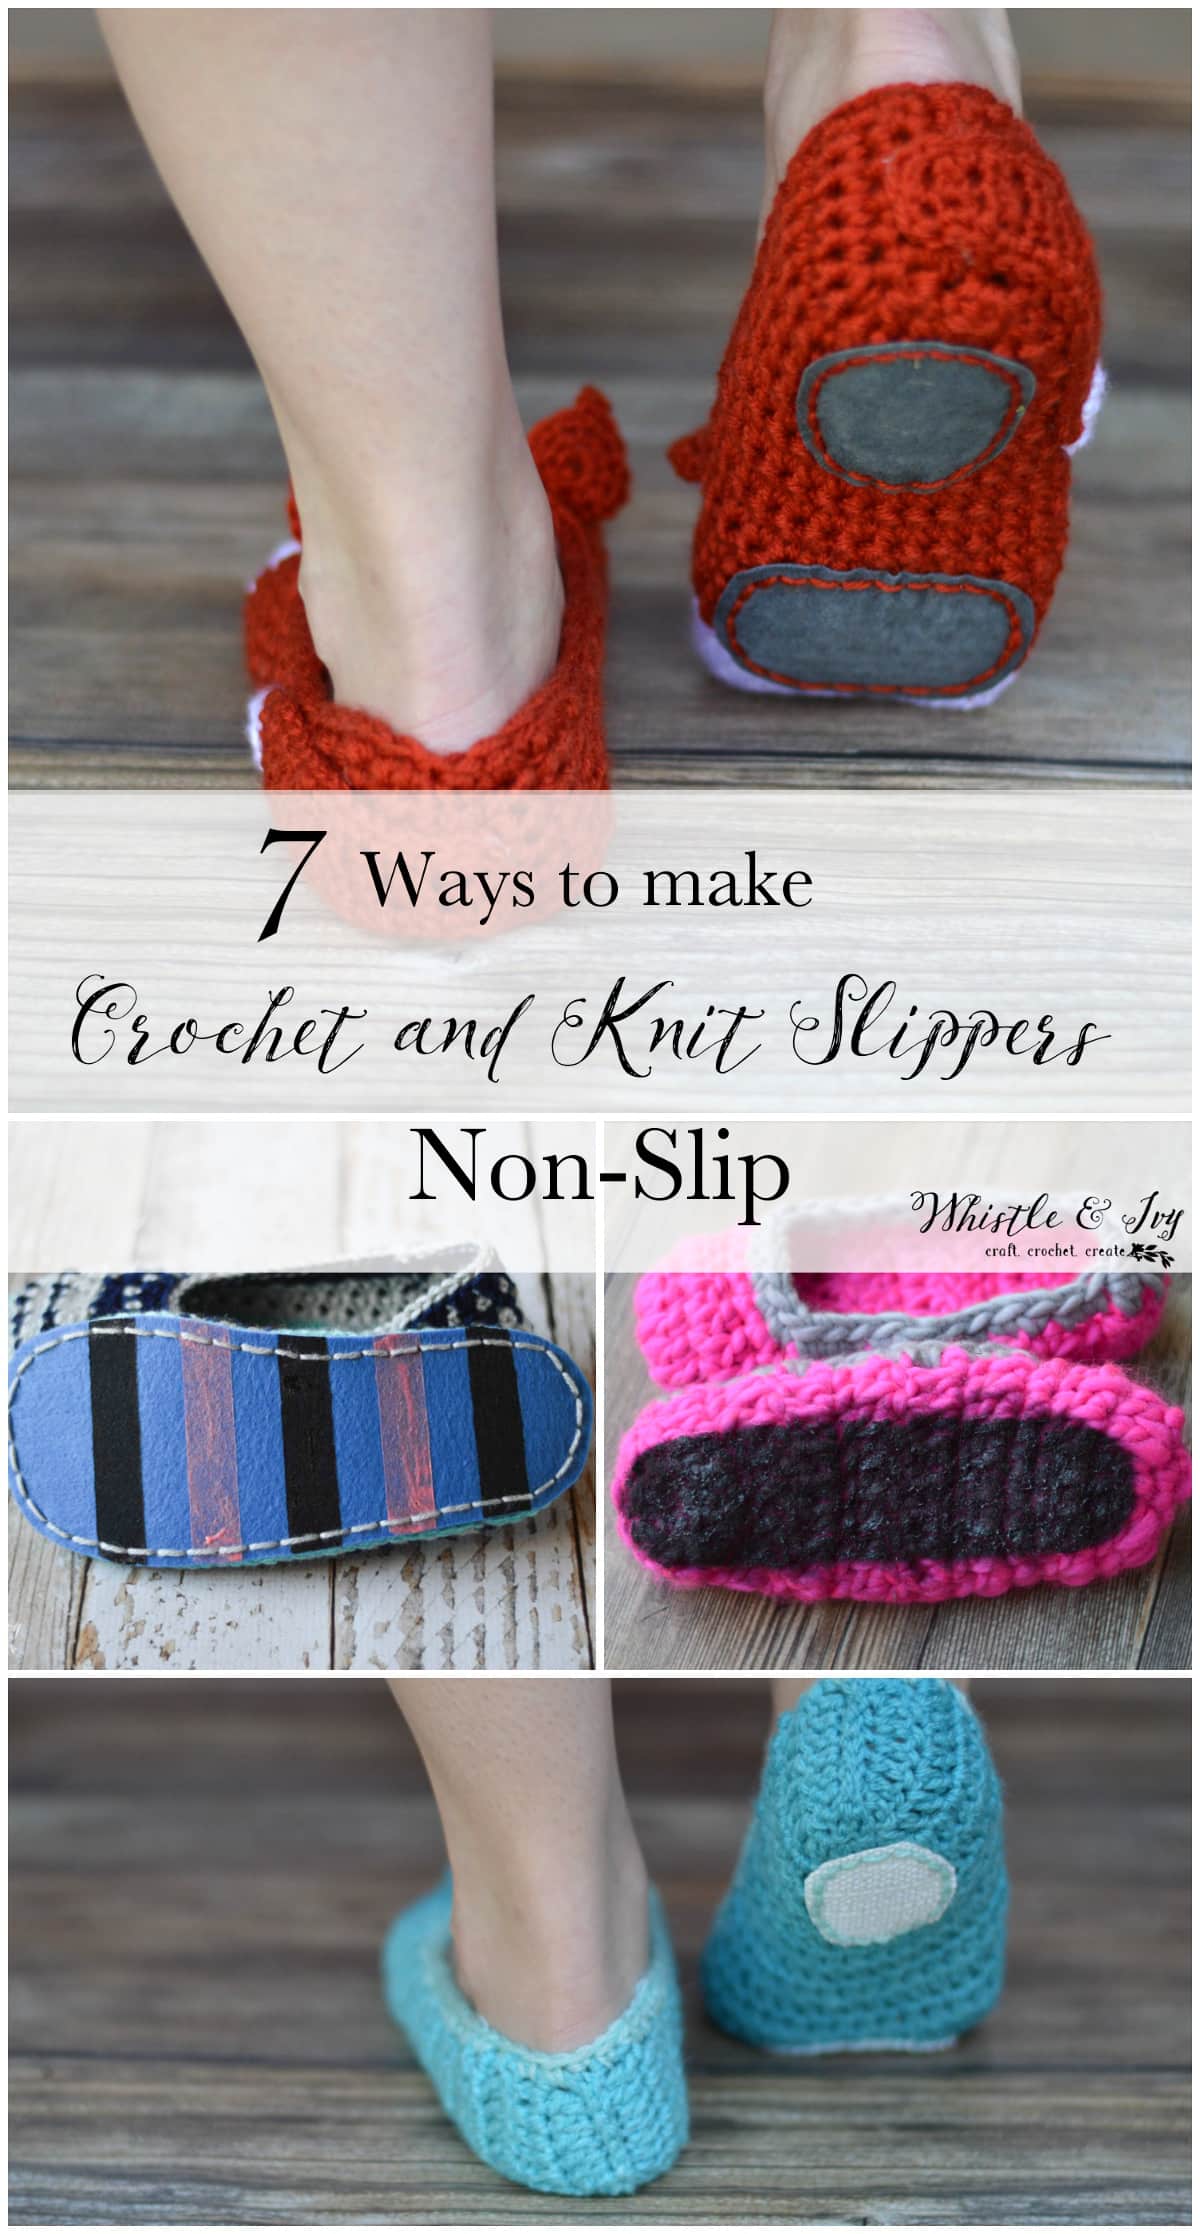 college showing different ways to make crochet slippers non-slip